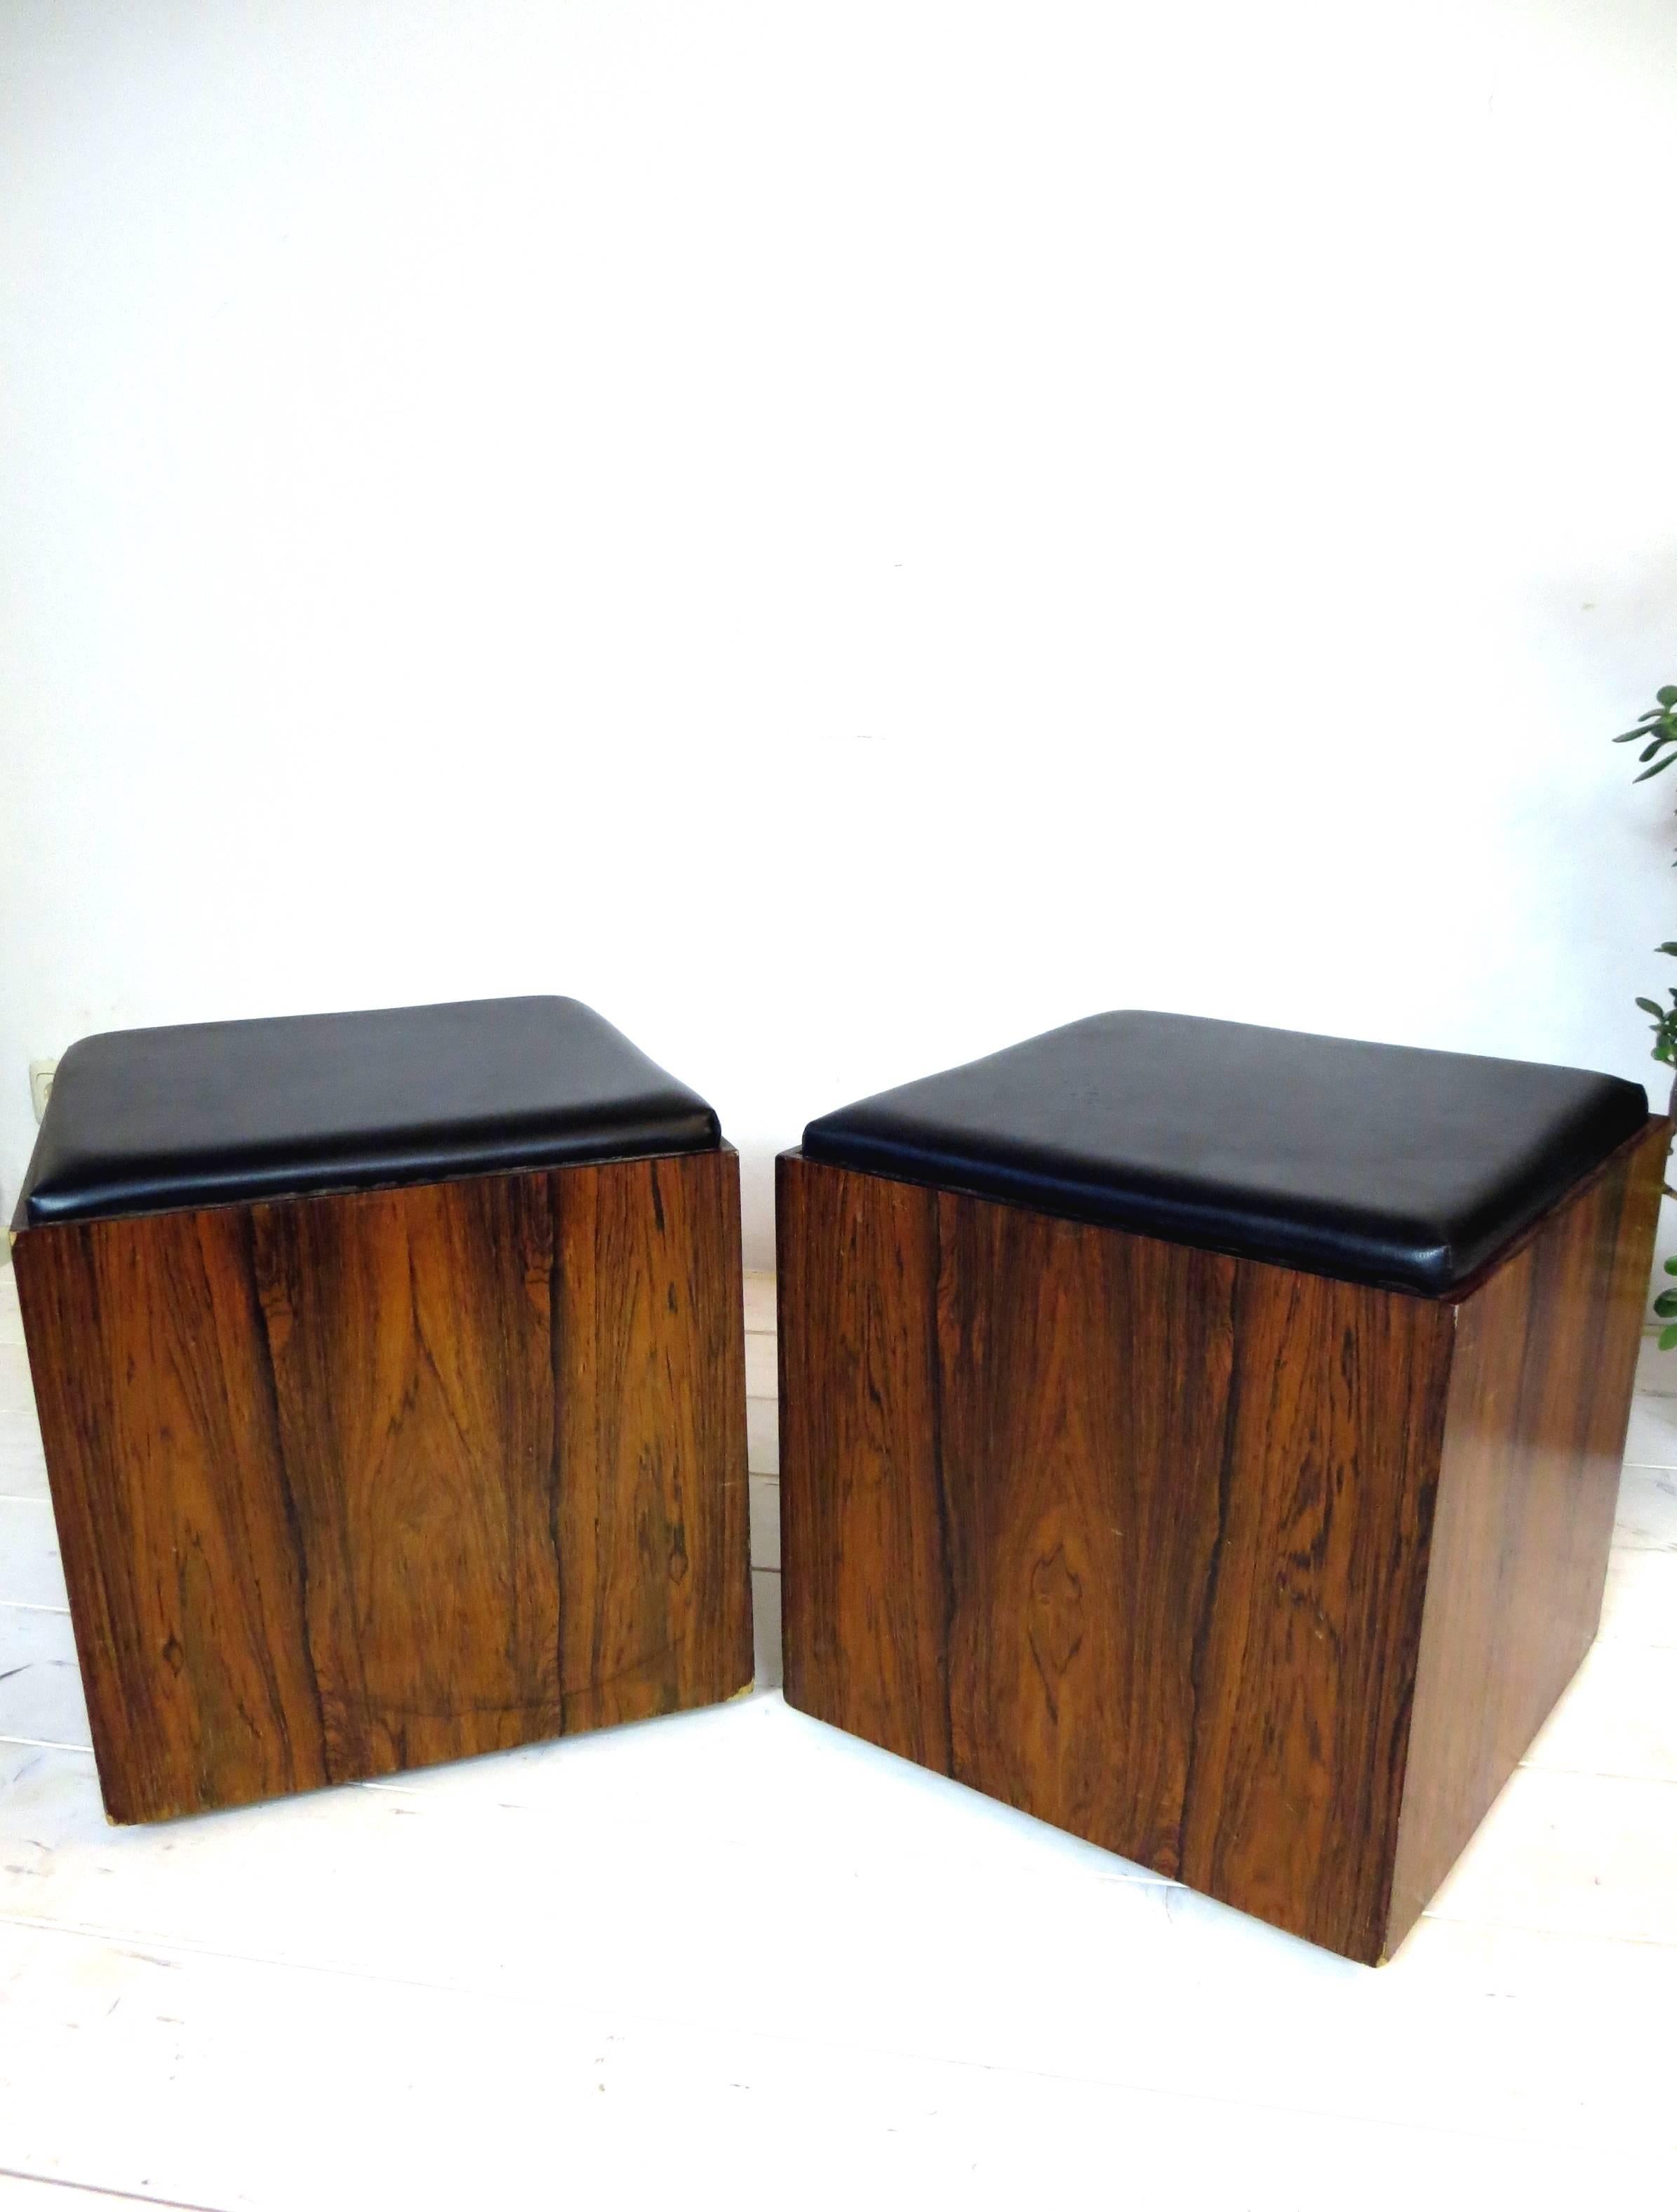 Extraordinary and very rare Danish Scandinavian Modern vintage jewels for varied use - chair / ottoman / table - from the 1960s.
Special features are the beautiful visible Rio Rosewood grain - real wood veneer - , the pad area which is covered with